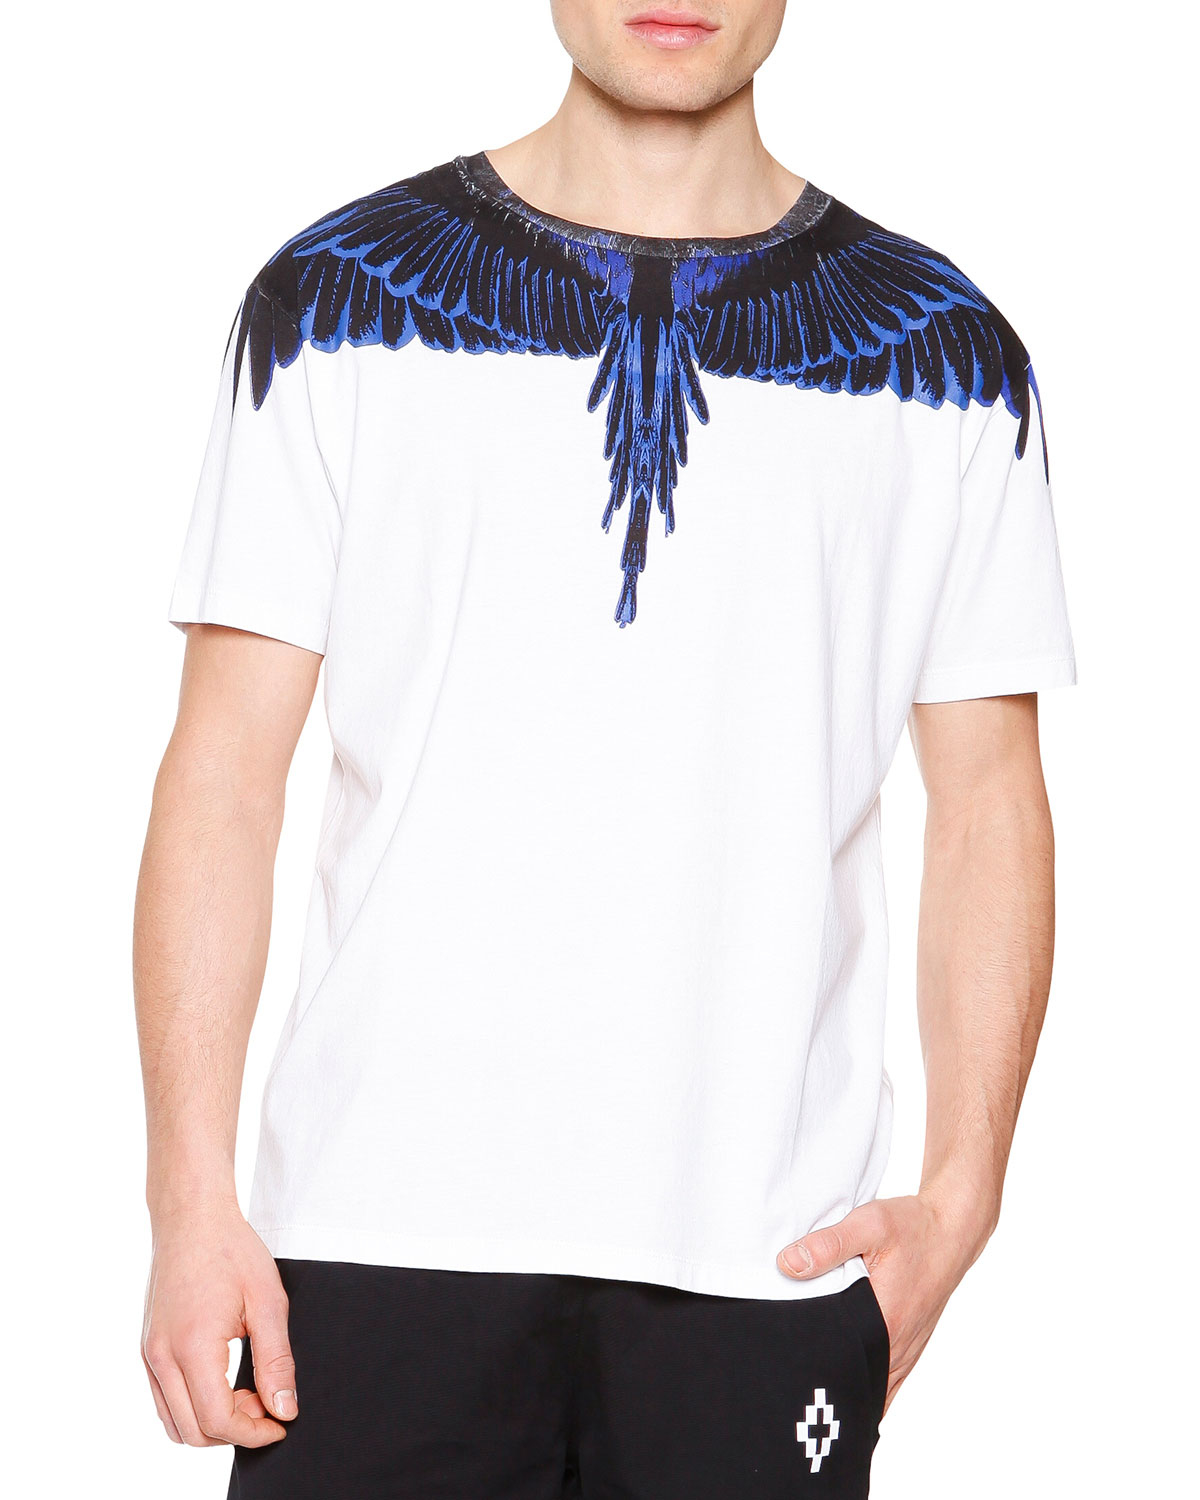 Lyst - Marcelo Burlon Blue Feathers Graphic T-Shirt in White for Men